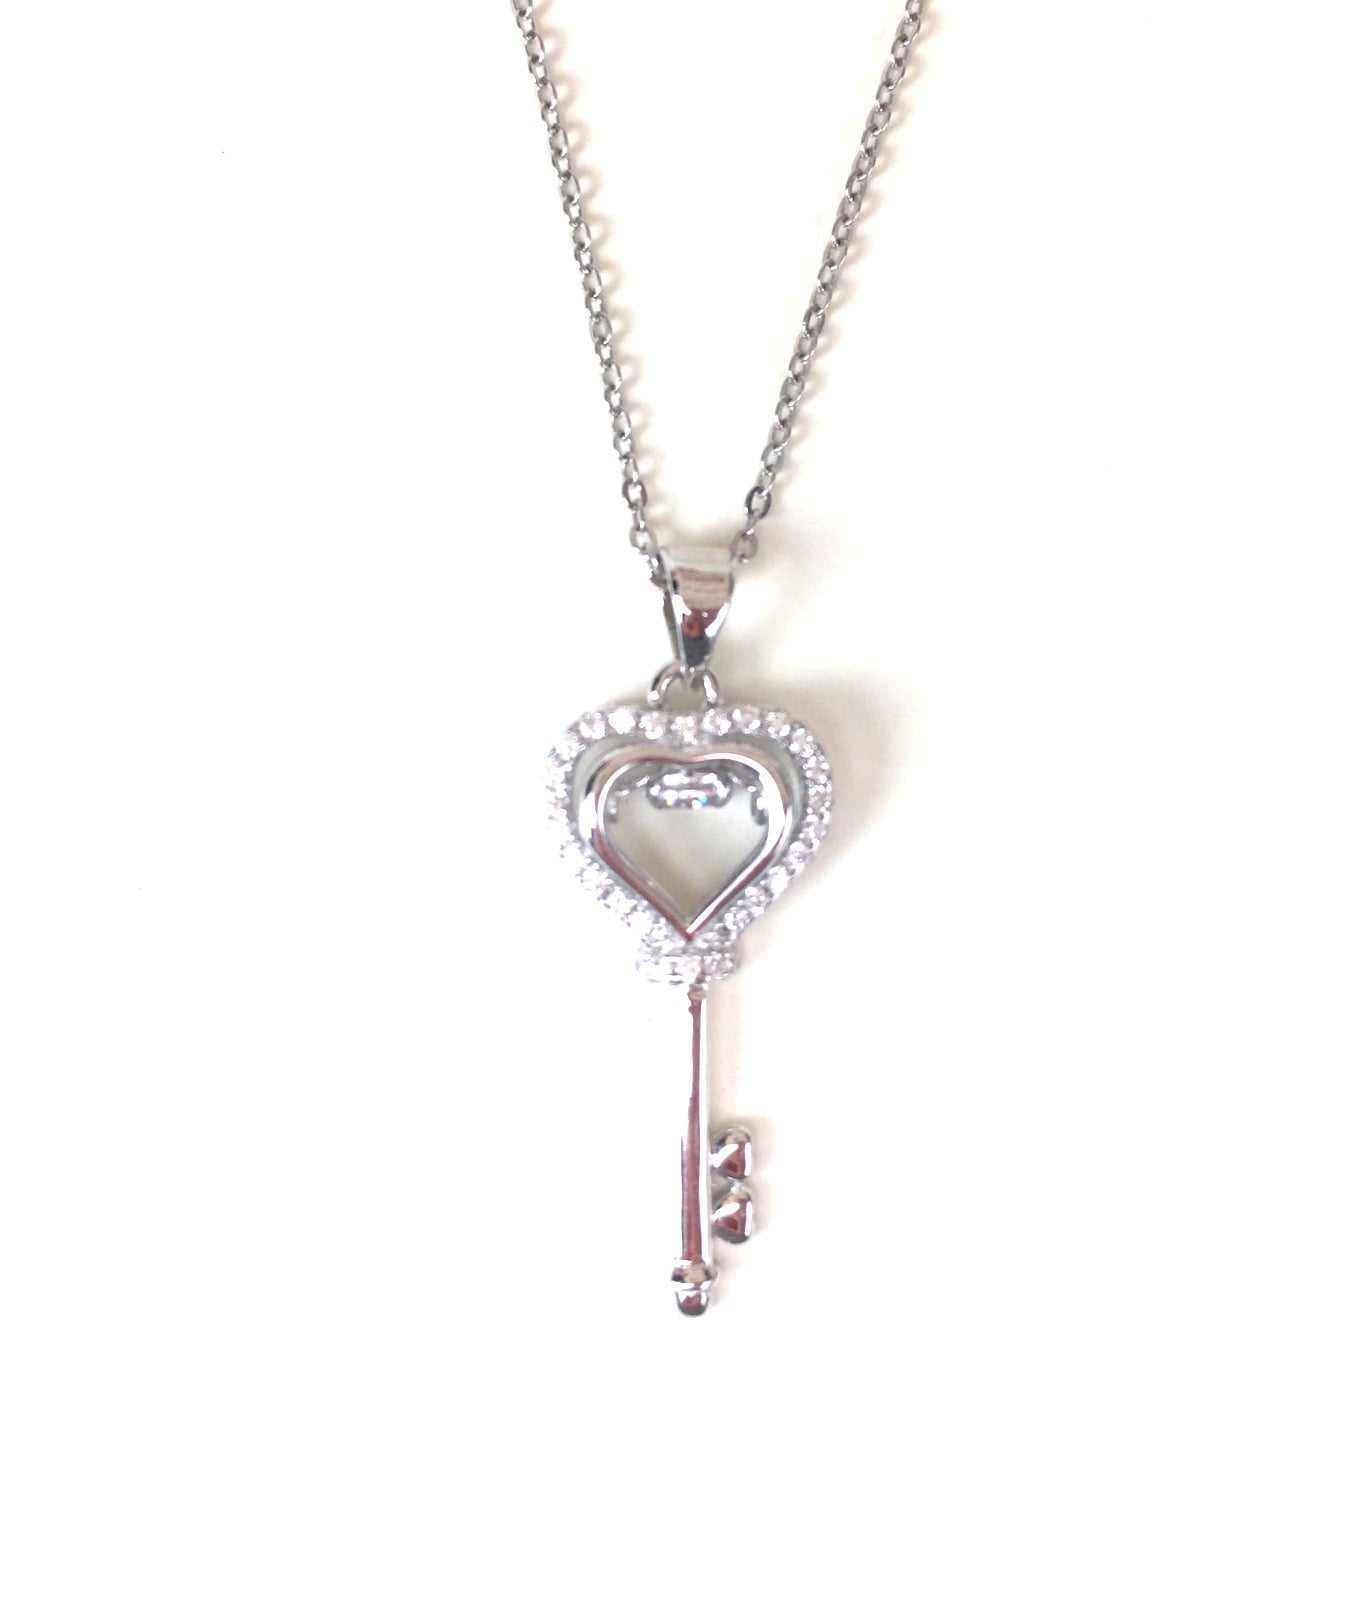 HEART KEY WITH STONE PAVE CZ STERLING SILVER NECKLACE